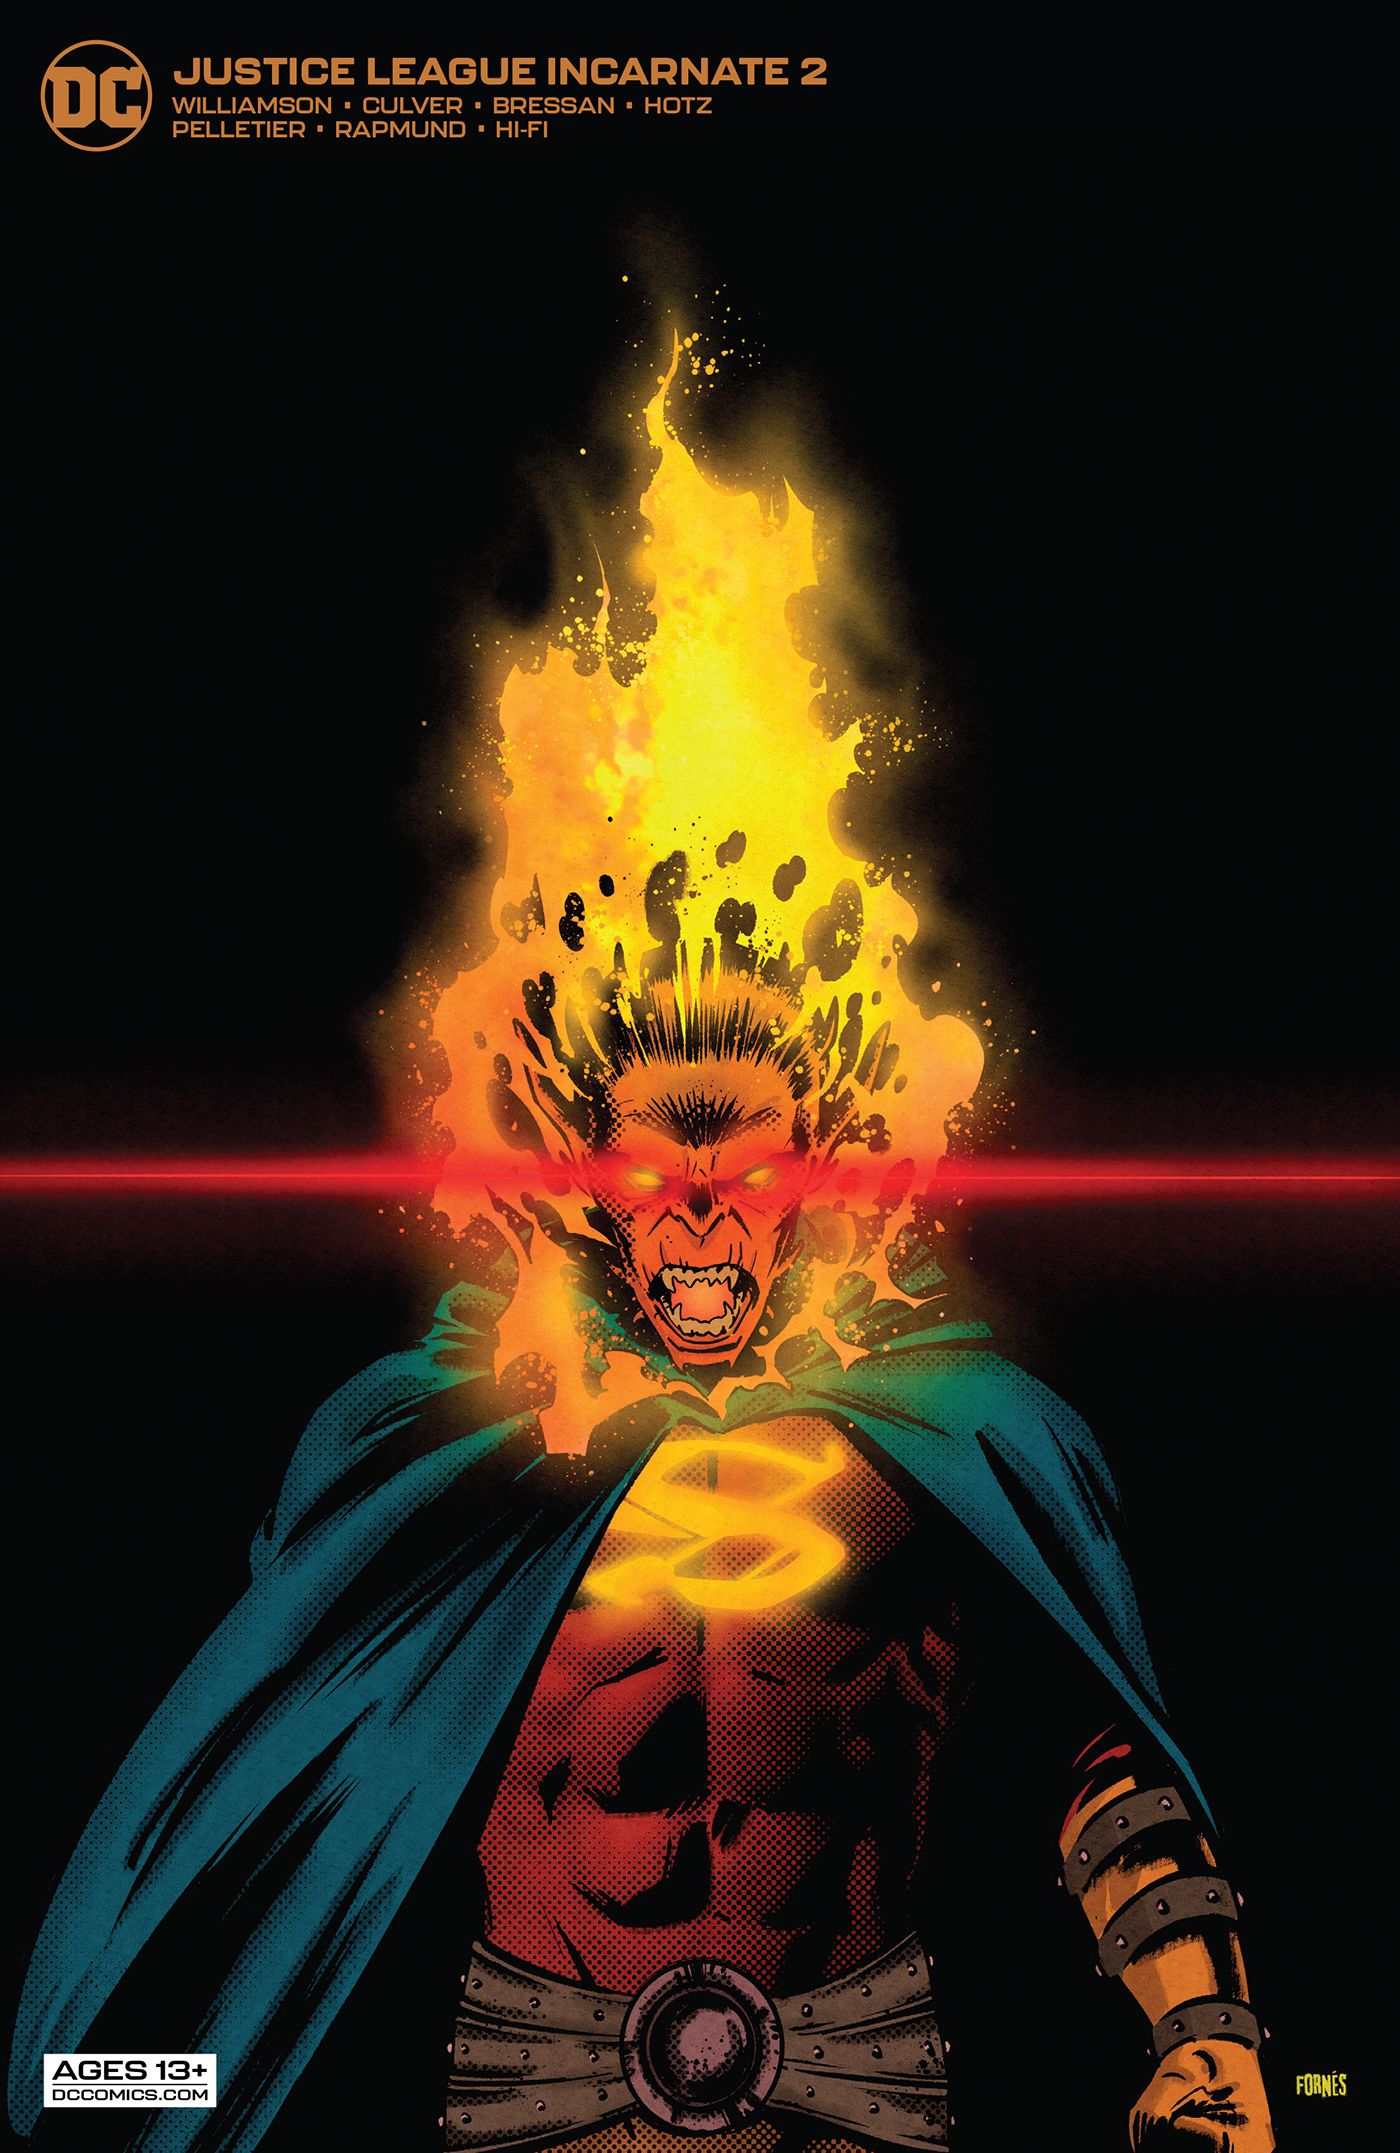 A variant cover for Justice League Incarnate #2 spotlights the Superdemon Etrigan.